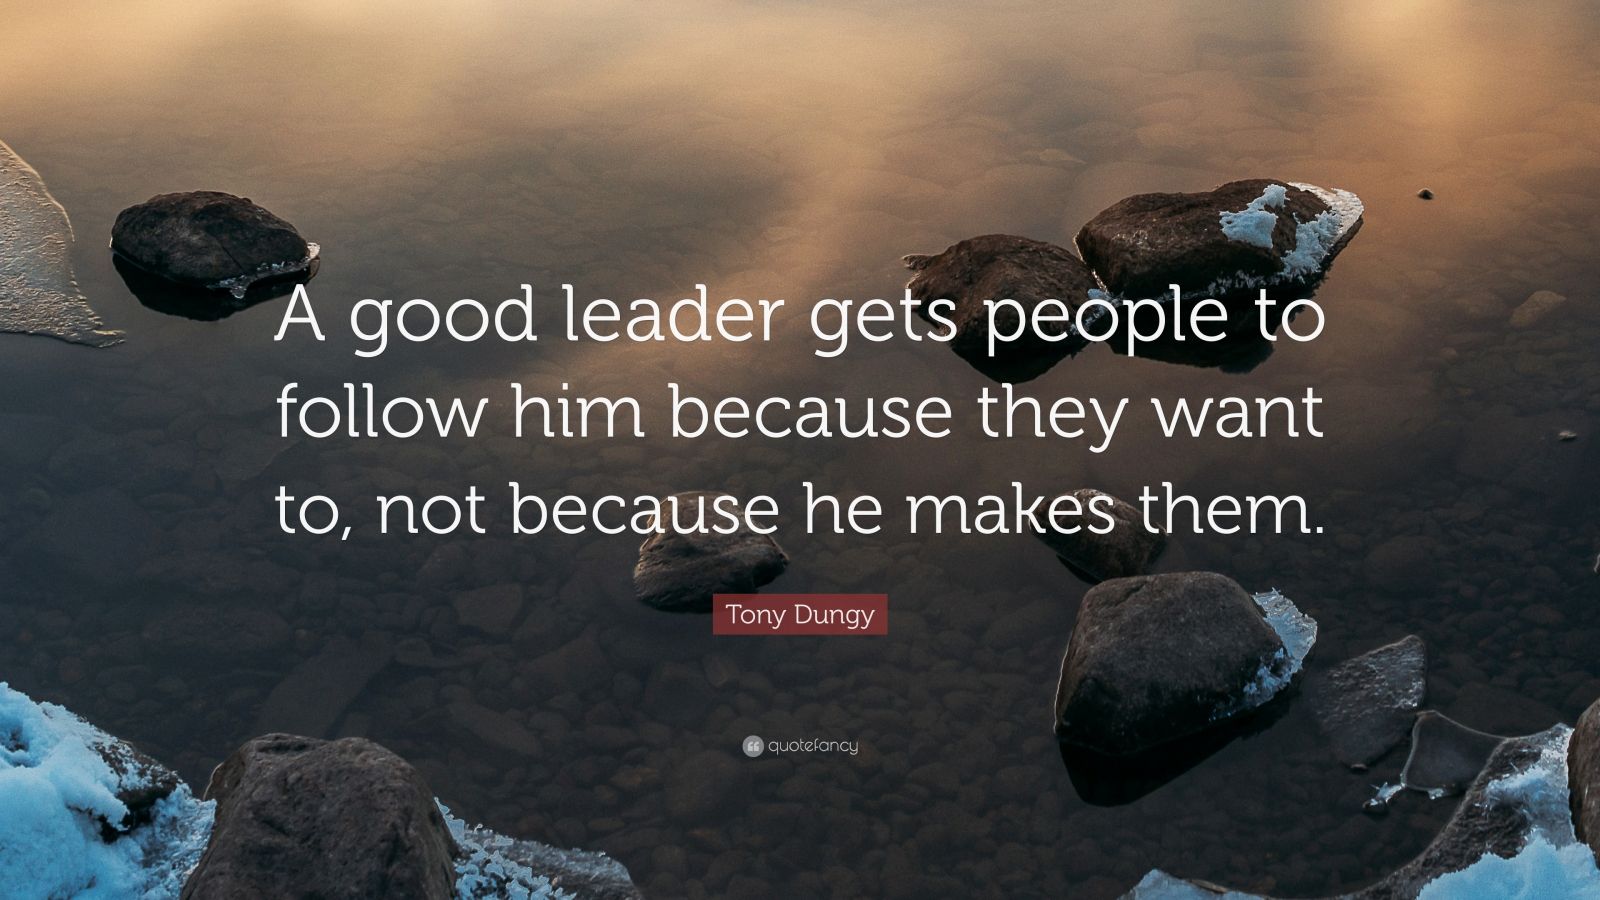 Tony Dungy Quote: “A good leader gets people to follow him because they